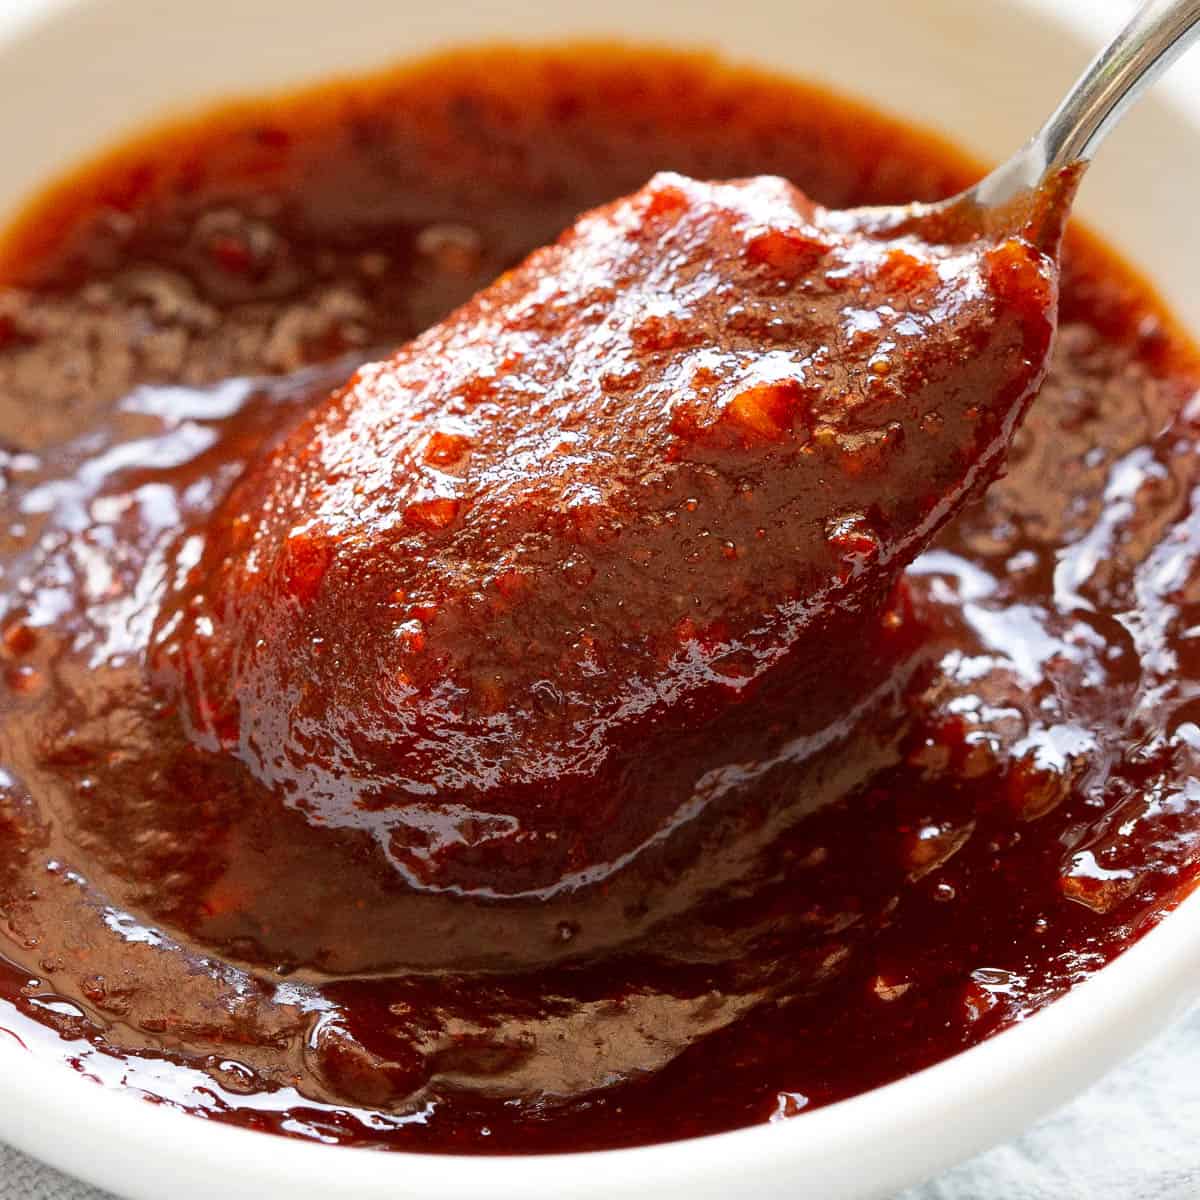 A spoon scoops out some all purpose gochujang sauce from a small white dish.